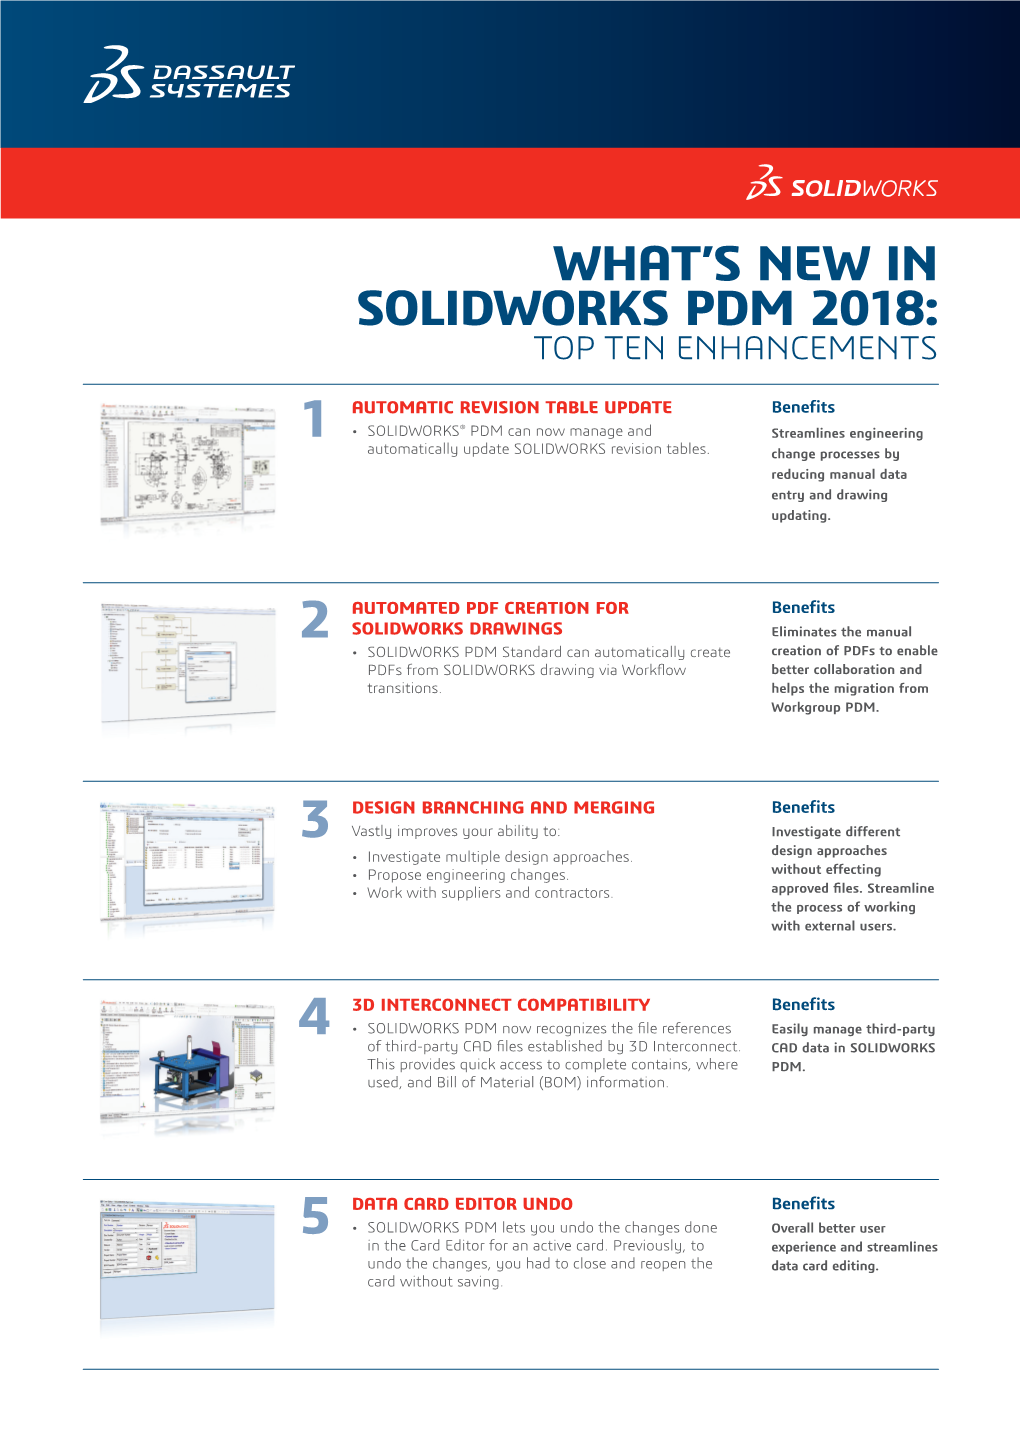 What's New in Solidworks Pdm 2018